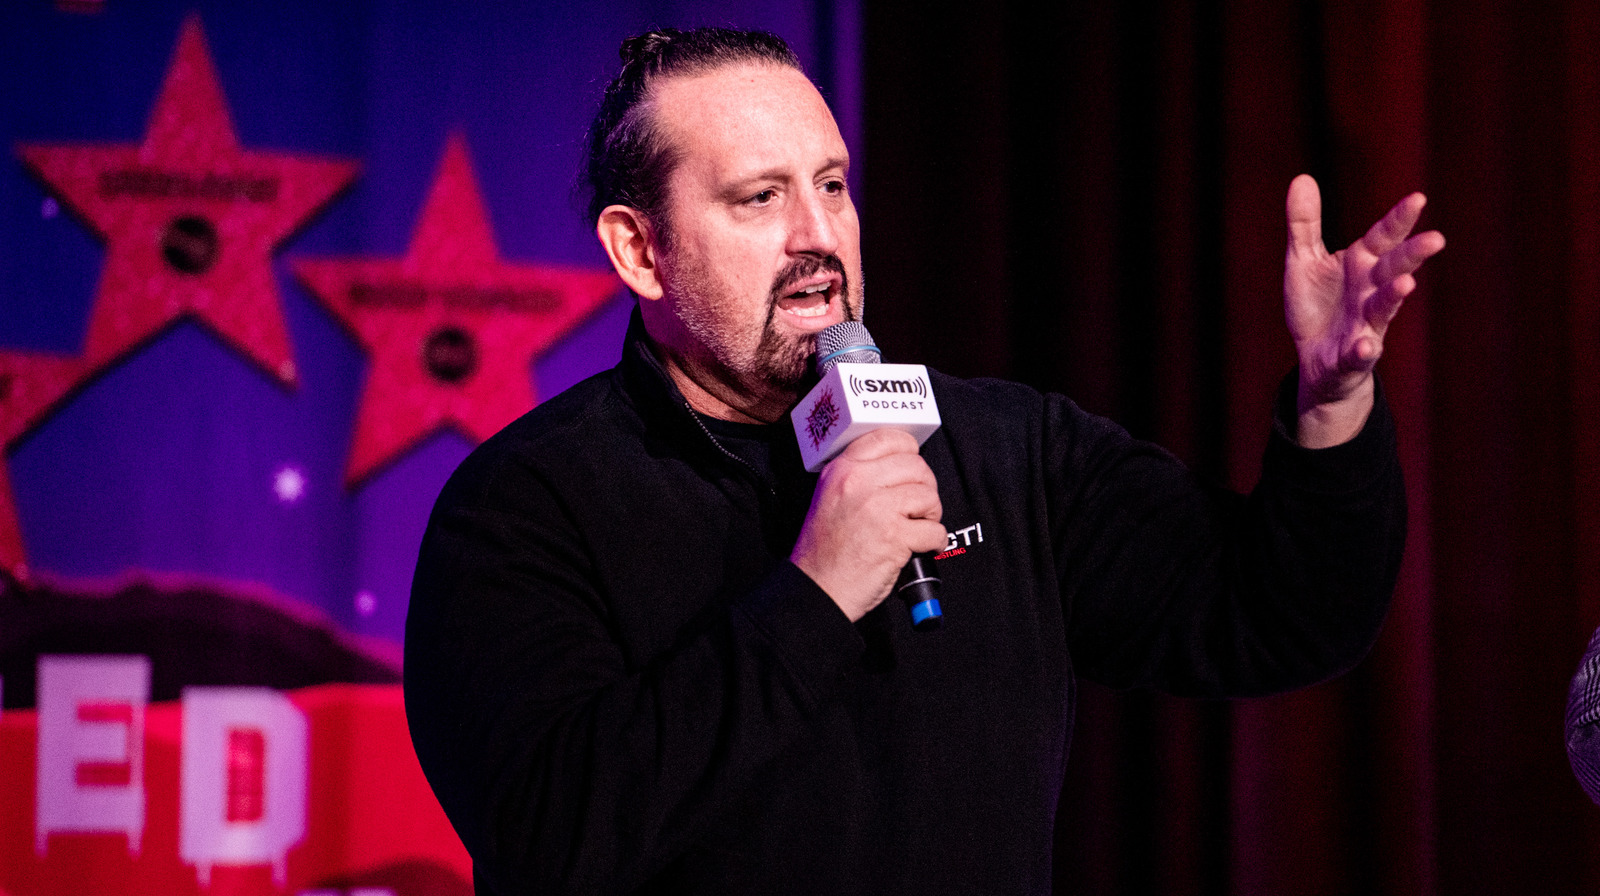 Tommy Dreamer Discusses Blurred Lines From AEW Dynamite Segment